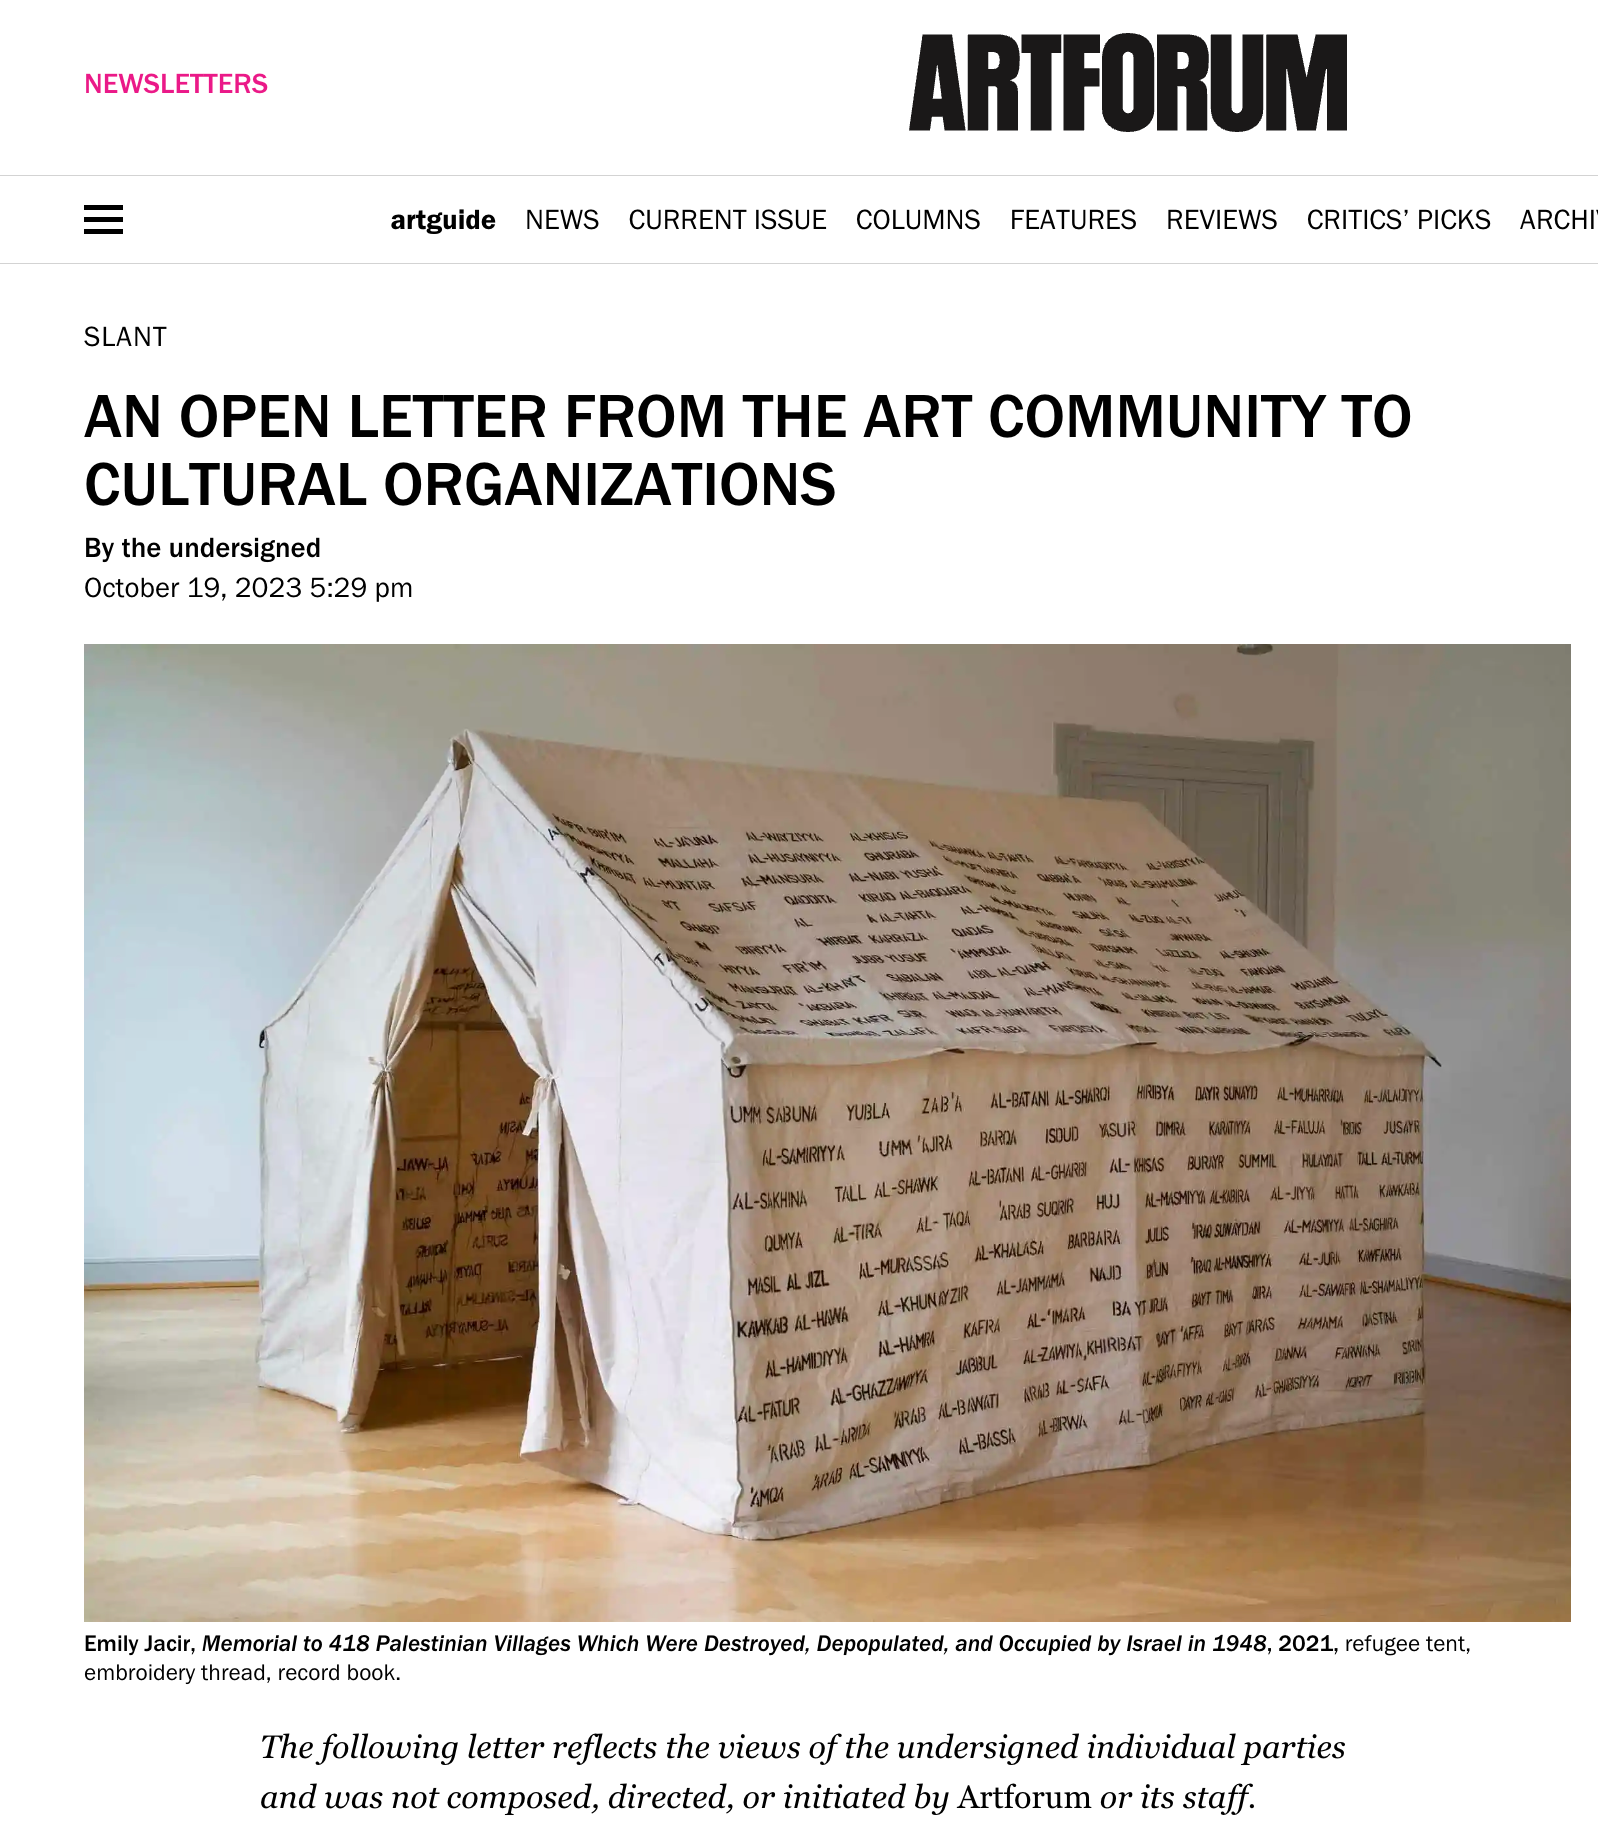 A letter published in Artforum and signed by thousands of artists called for “an end to the killing and harming of all civilians, an immediate ceasefire, the passage of humanitarian aid into Gaza, and the end of the complicity of our governing bodies in grave human rights violations and war crimes.”